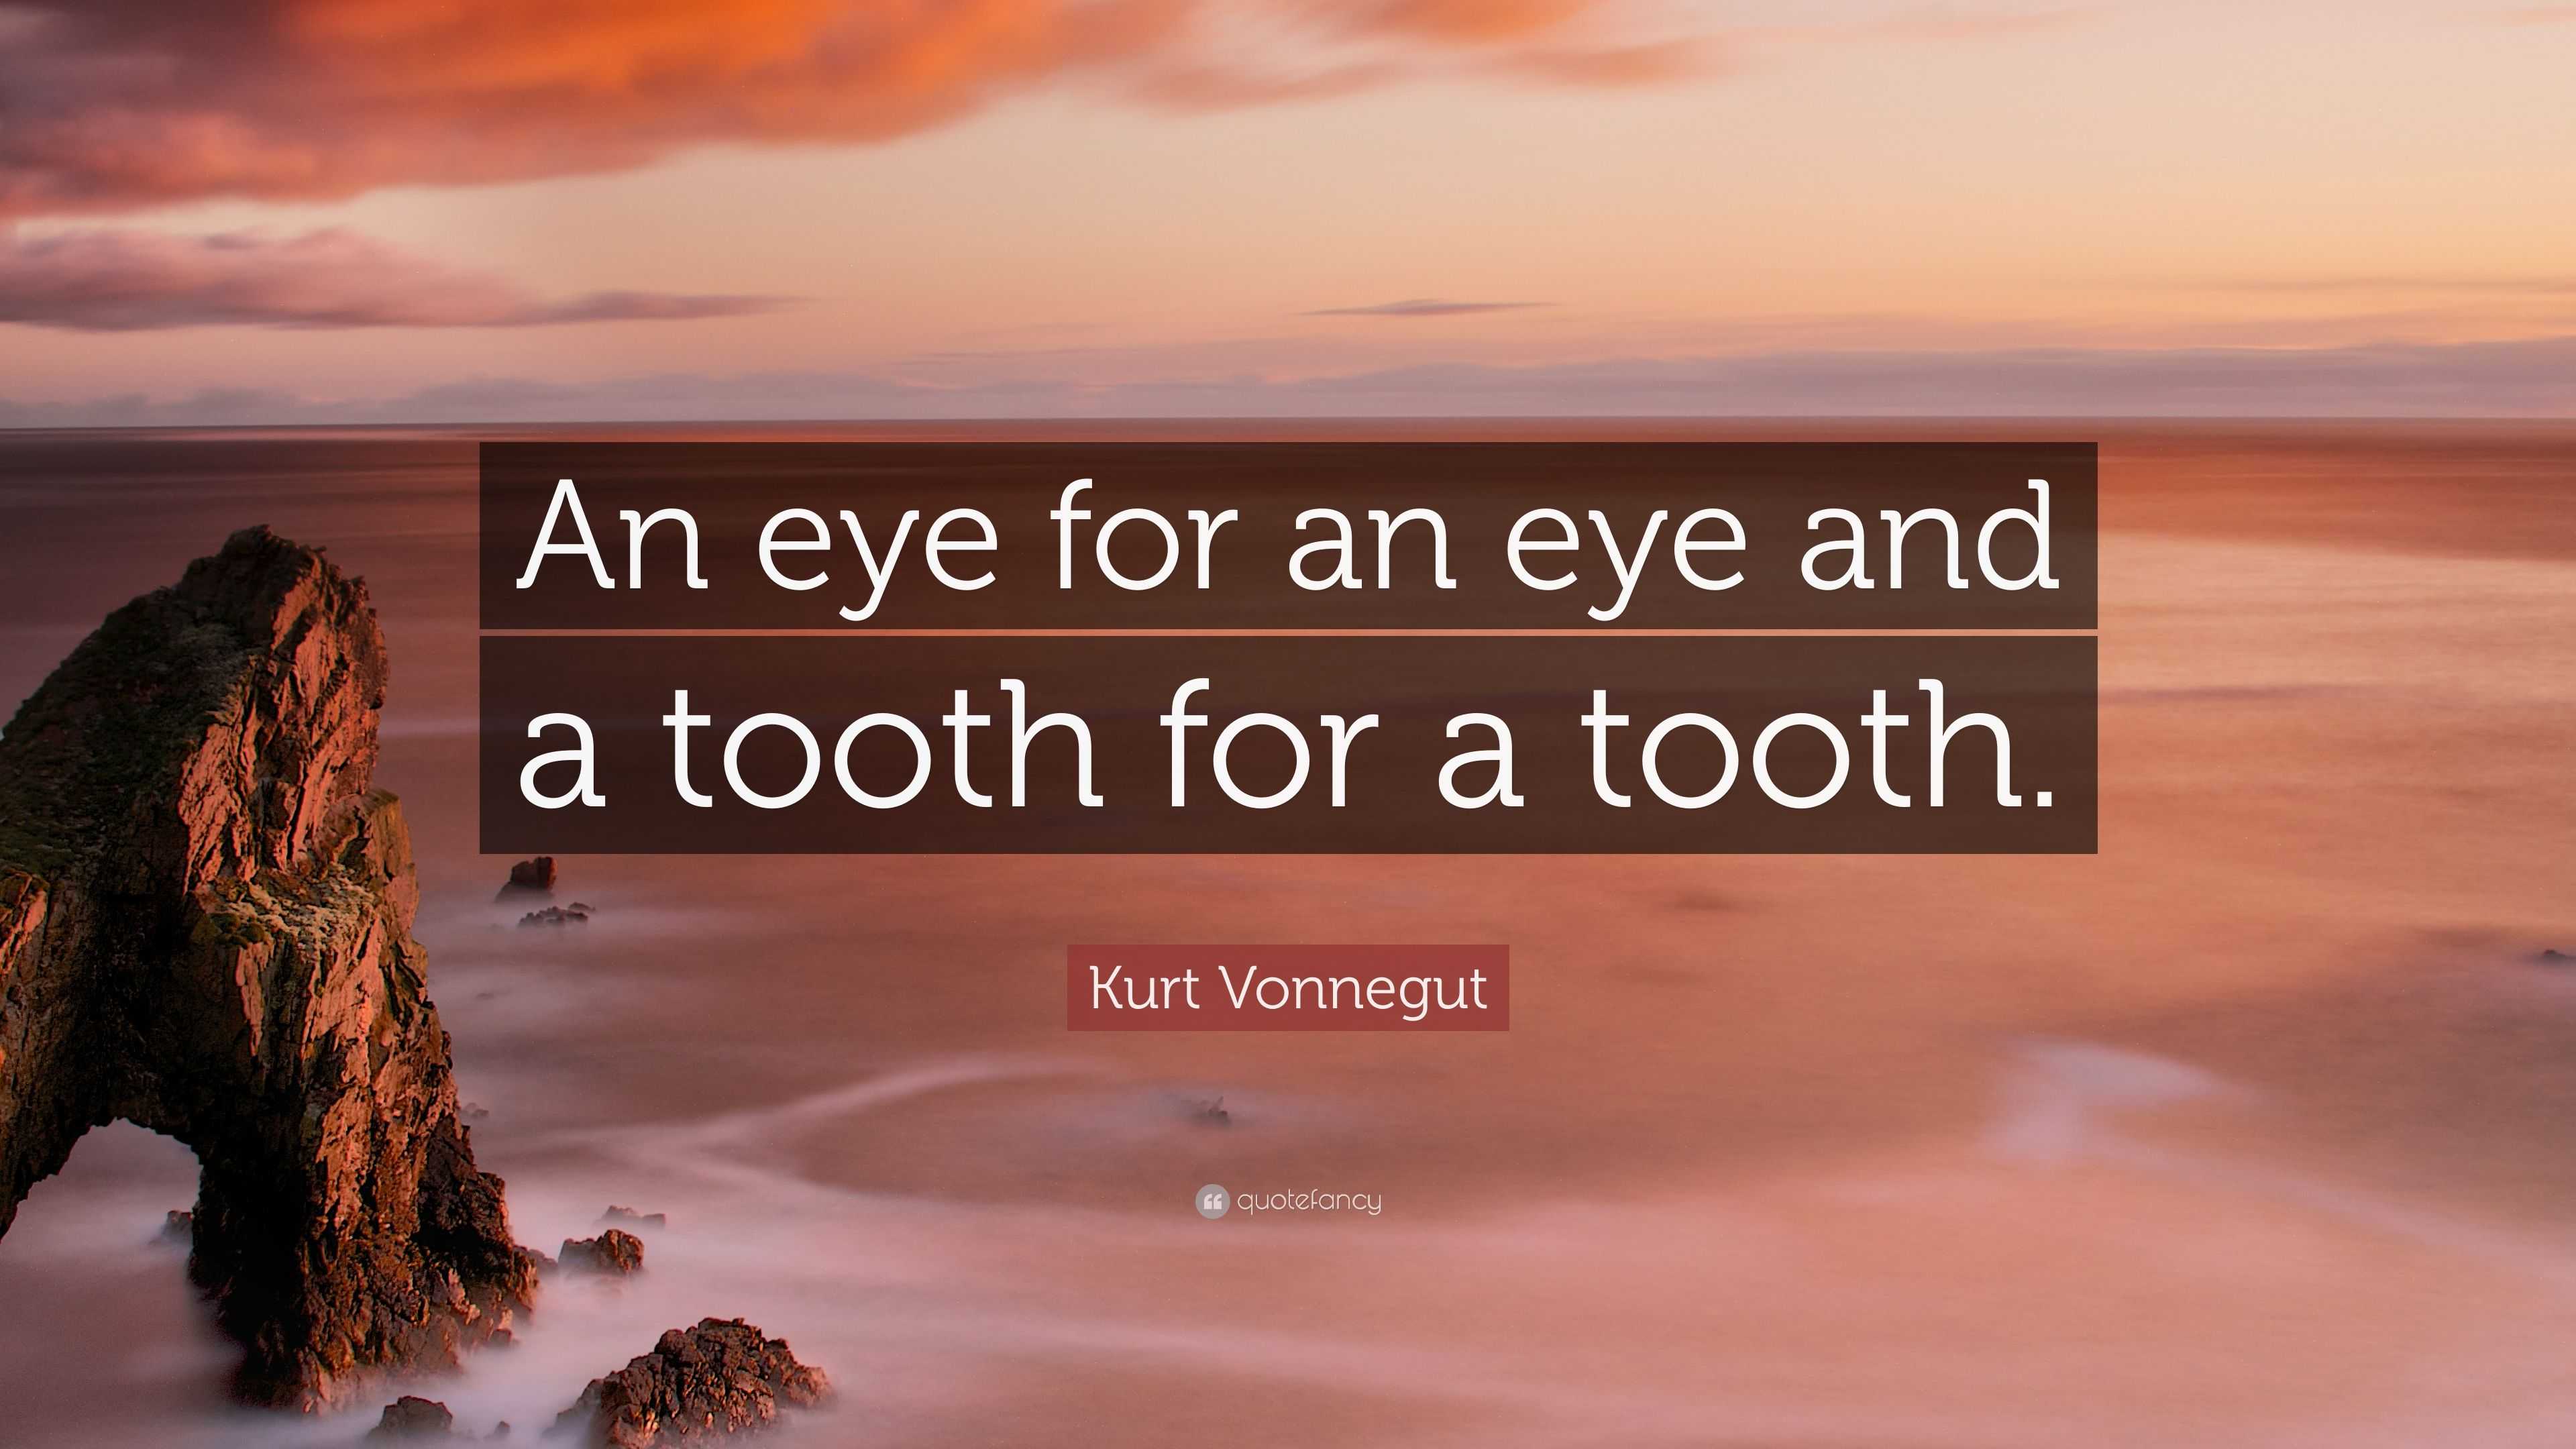 Kurt Vonnegut Quote: “An eye for an eye and a tooth for a tooth.”